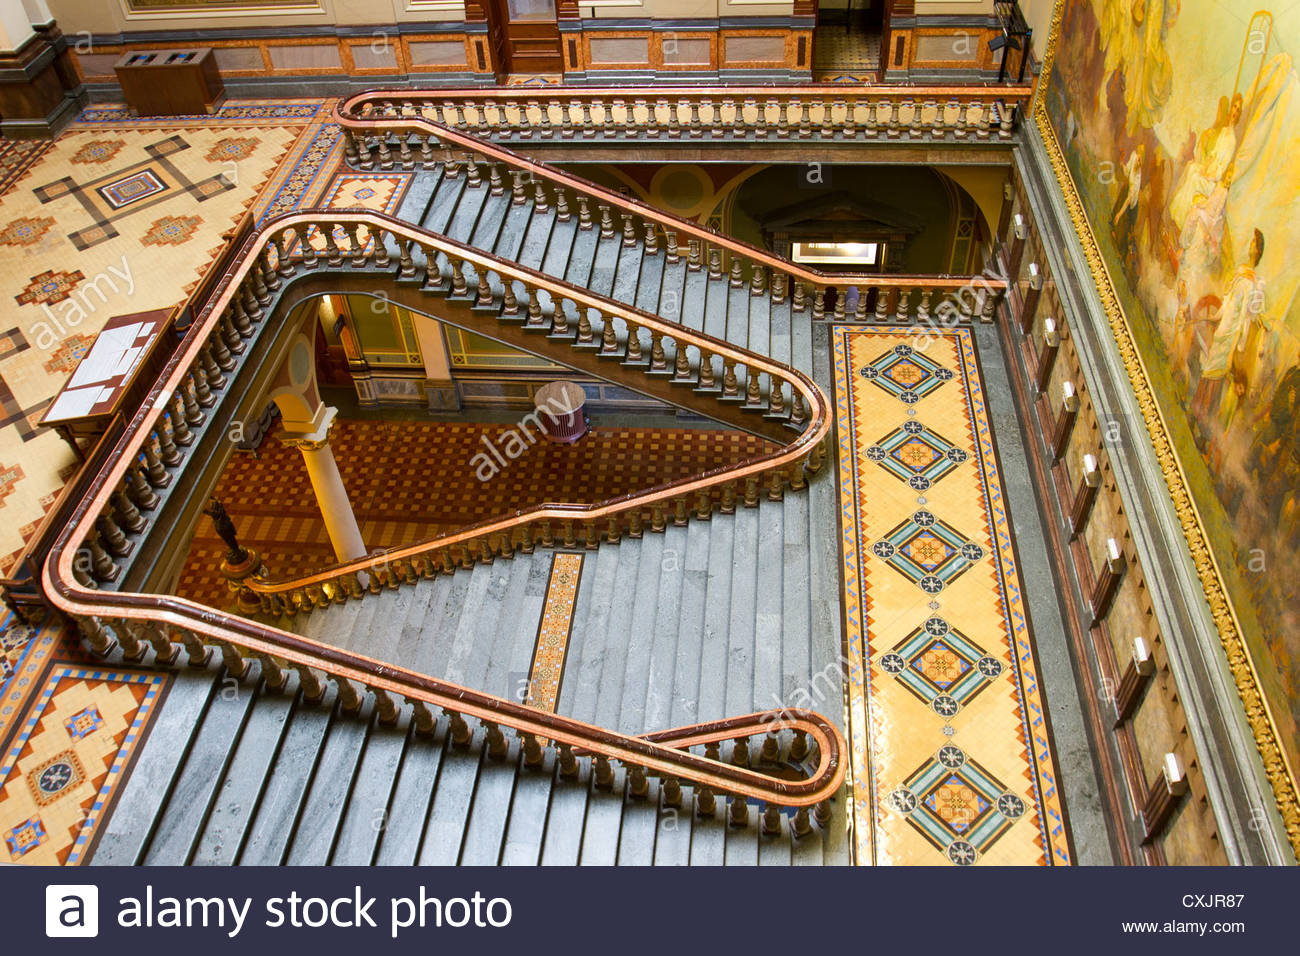 beautiful-staircase-and-tile-work-inside-the-iowa-state-capitol-building-CXJR87.jpg